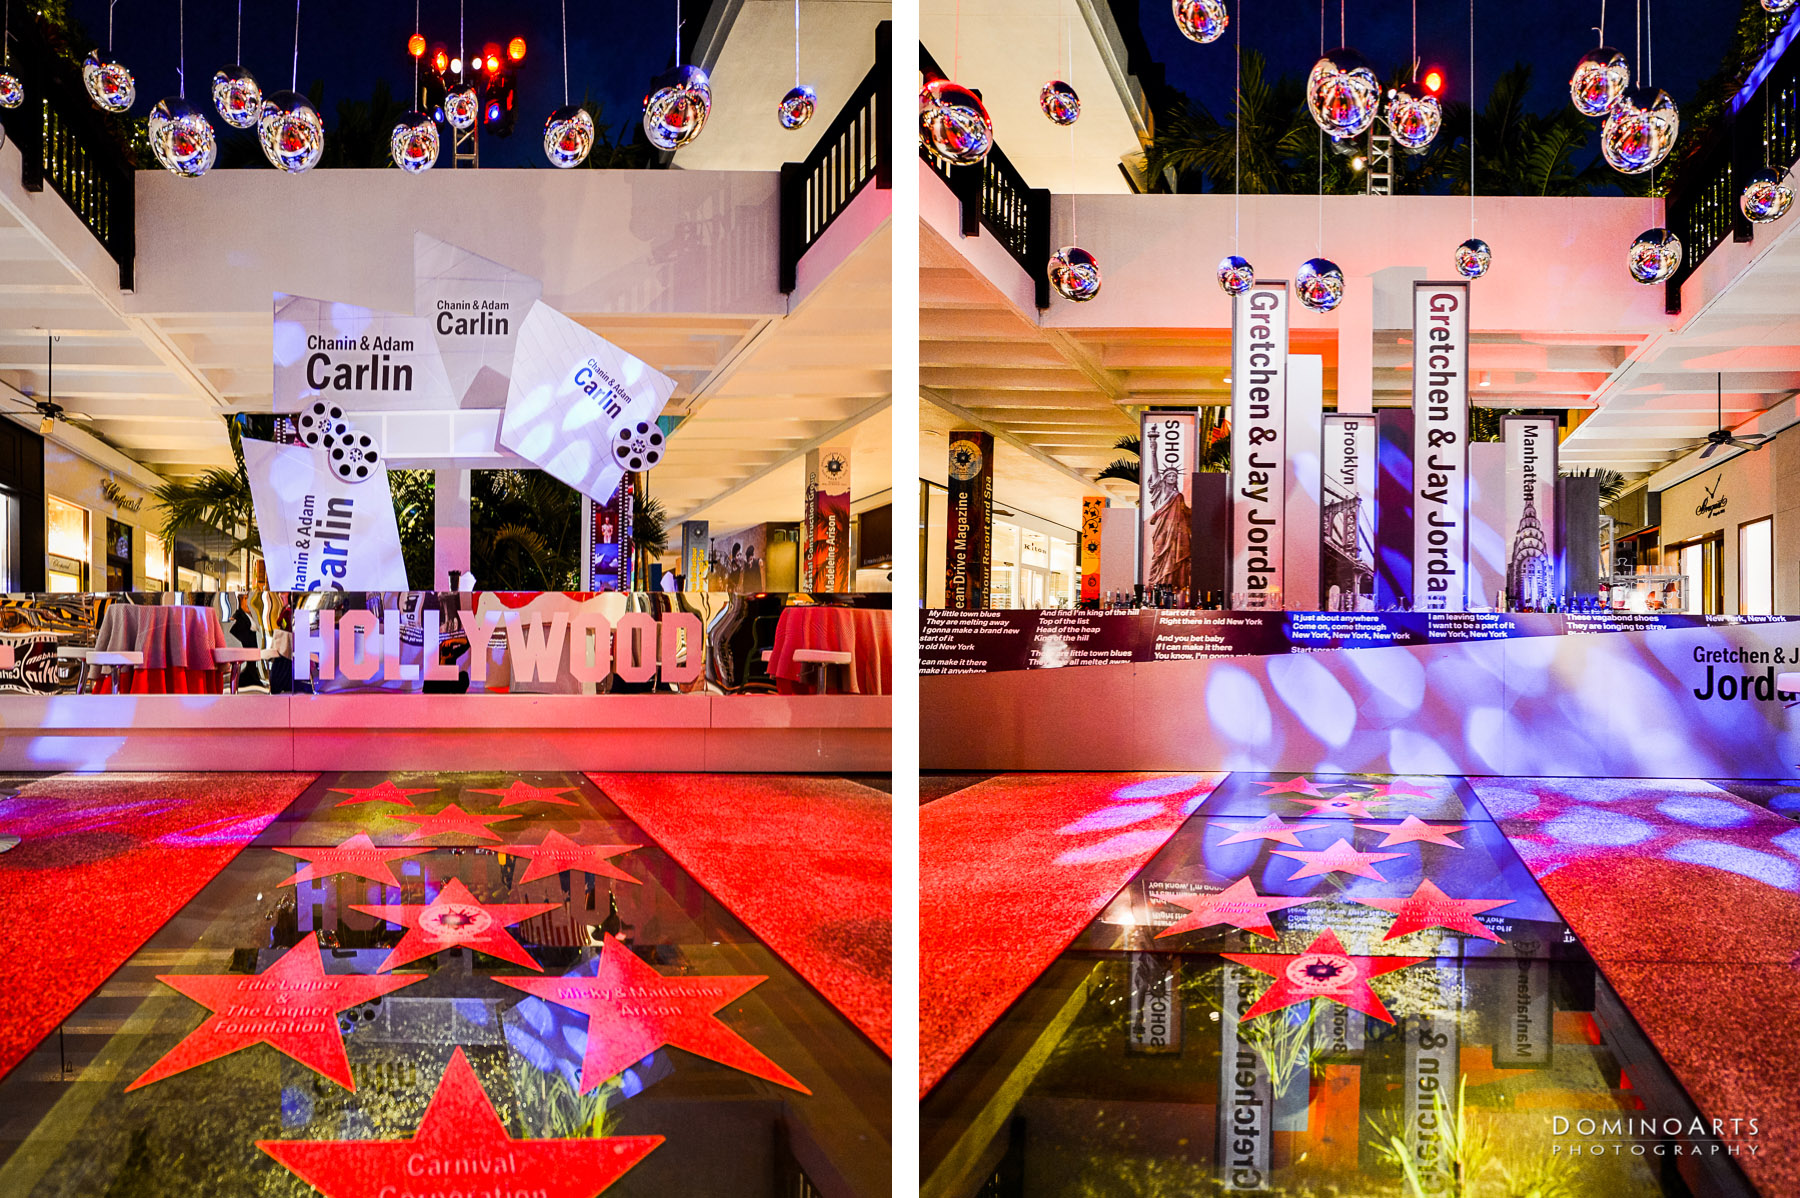 amazing decor at Corporate Event Bal Harbour Shops by Domino Arts Photography